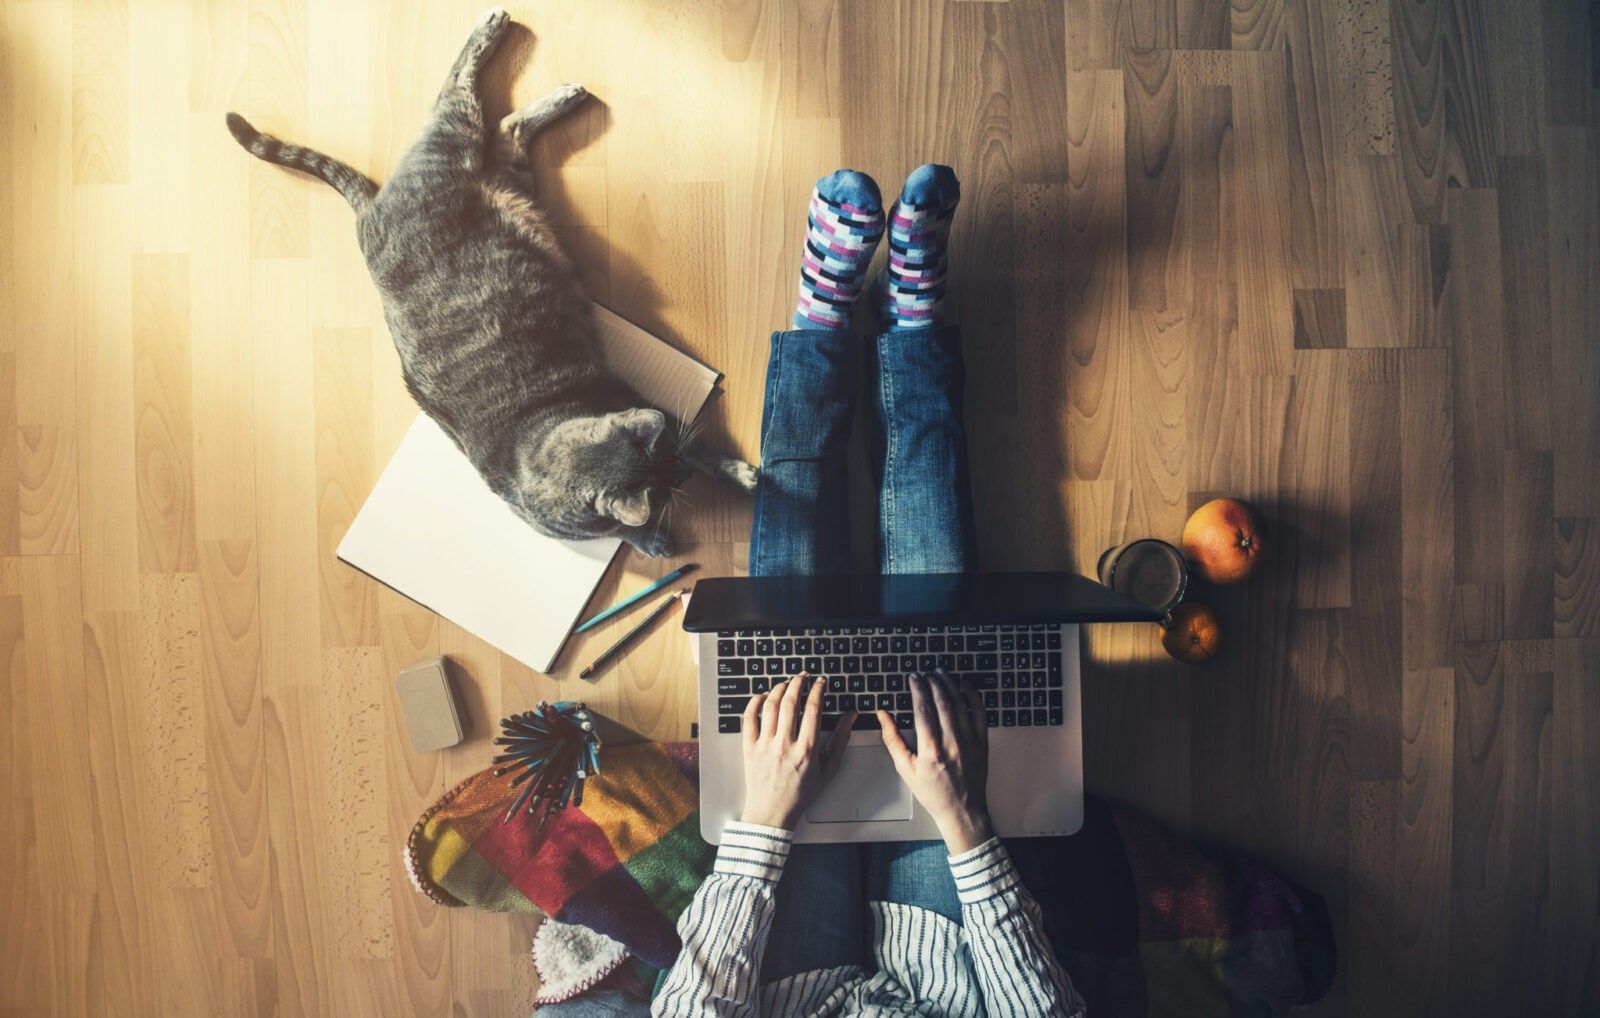 Want to work from home? Ask yourself: Can you separate work from play?